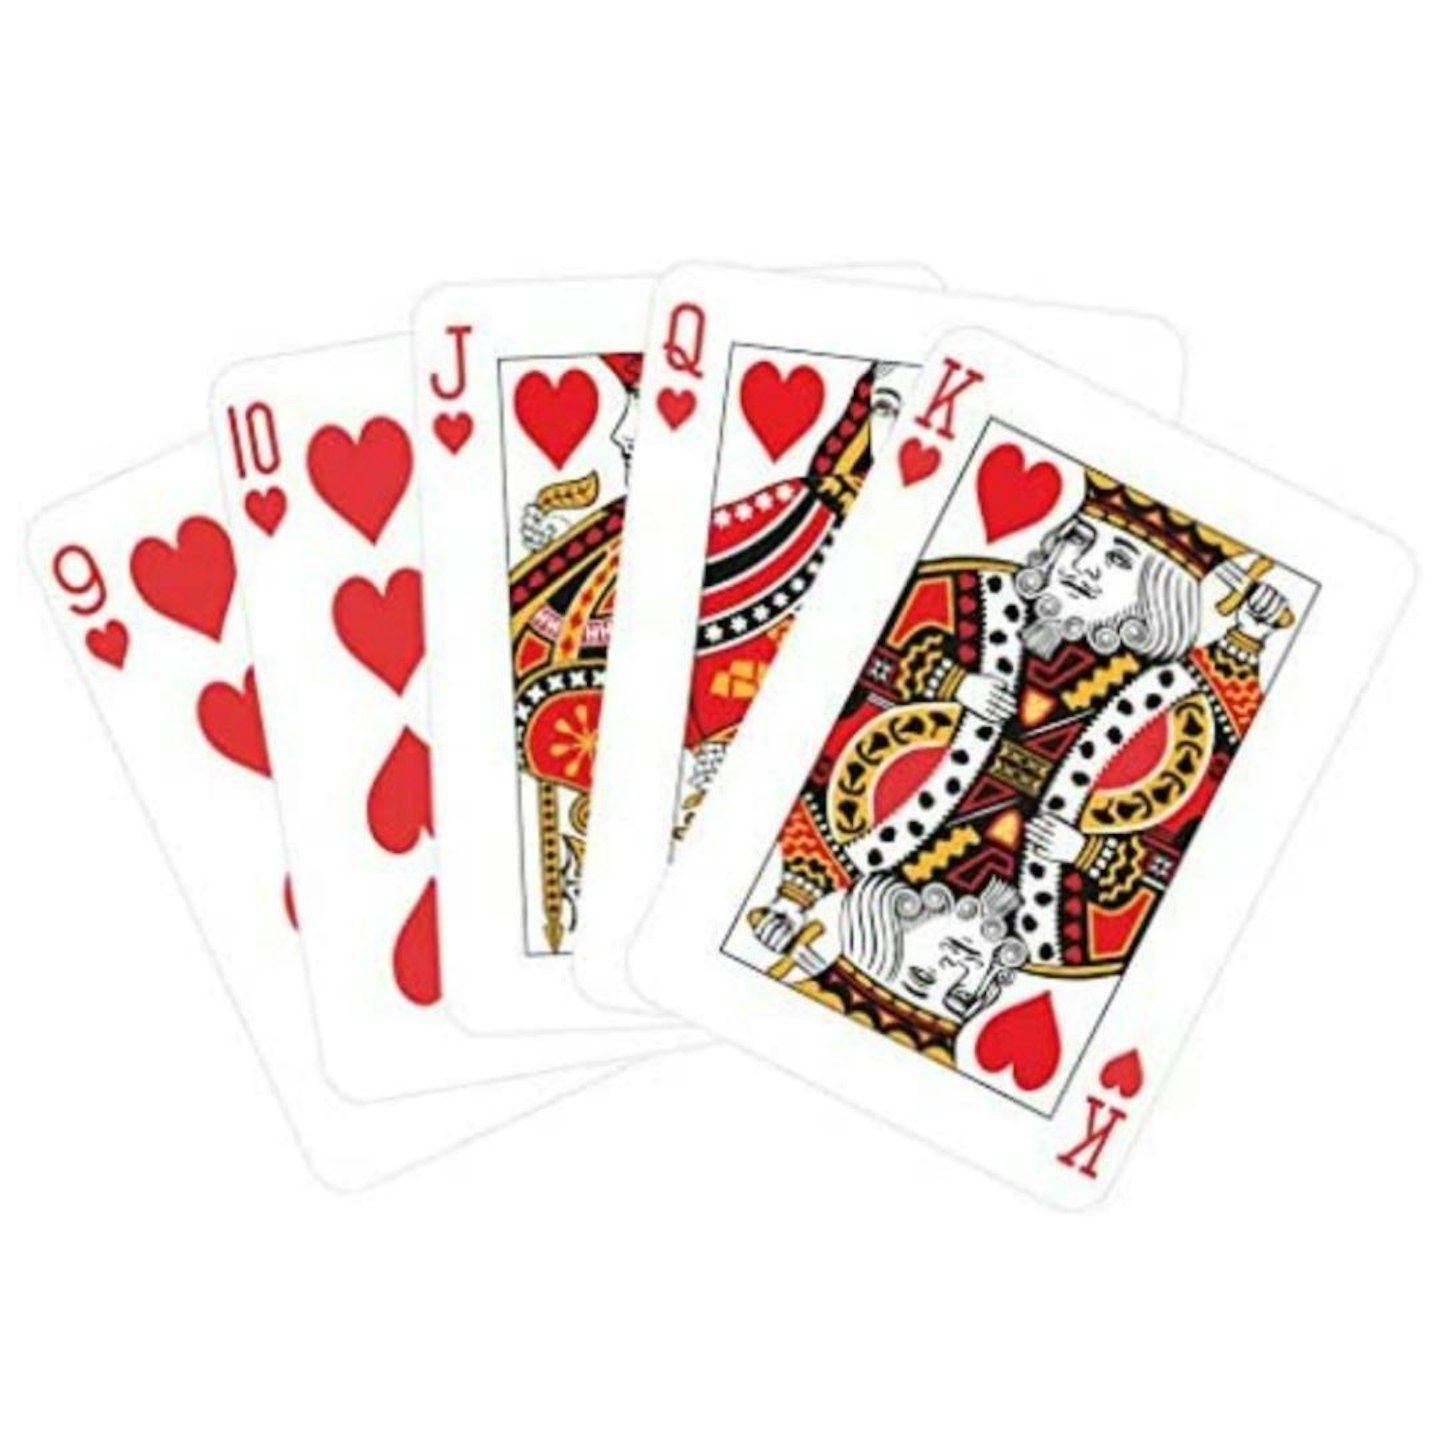 Standard Plastic Coated Playing Cards 52 Card Deck